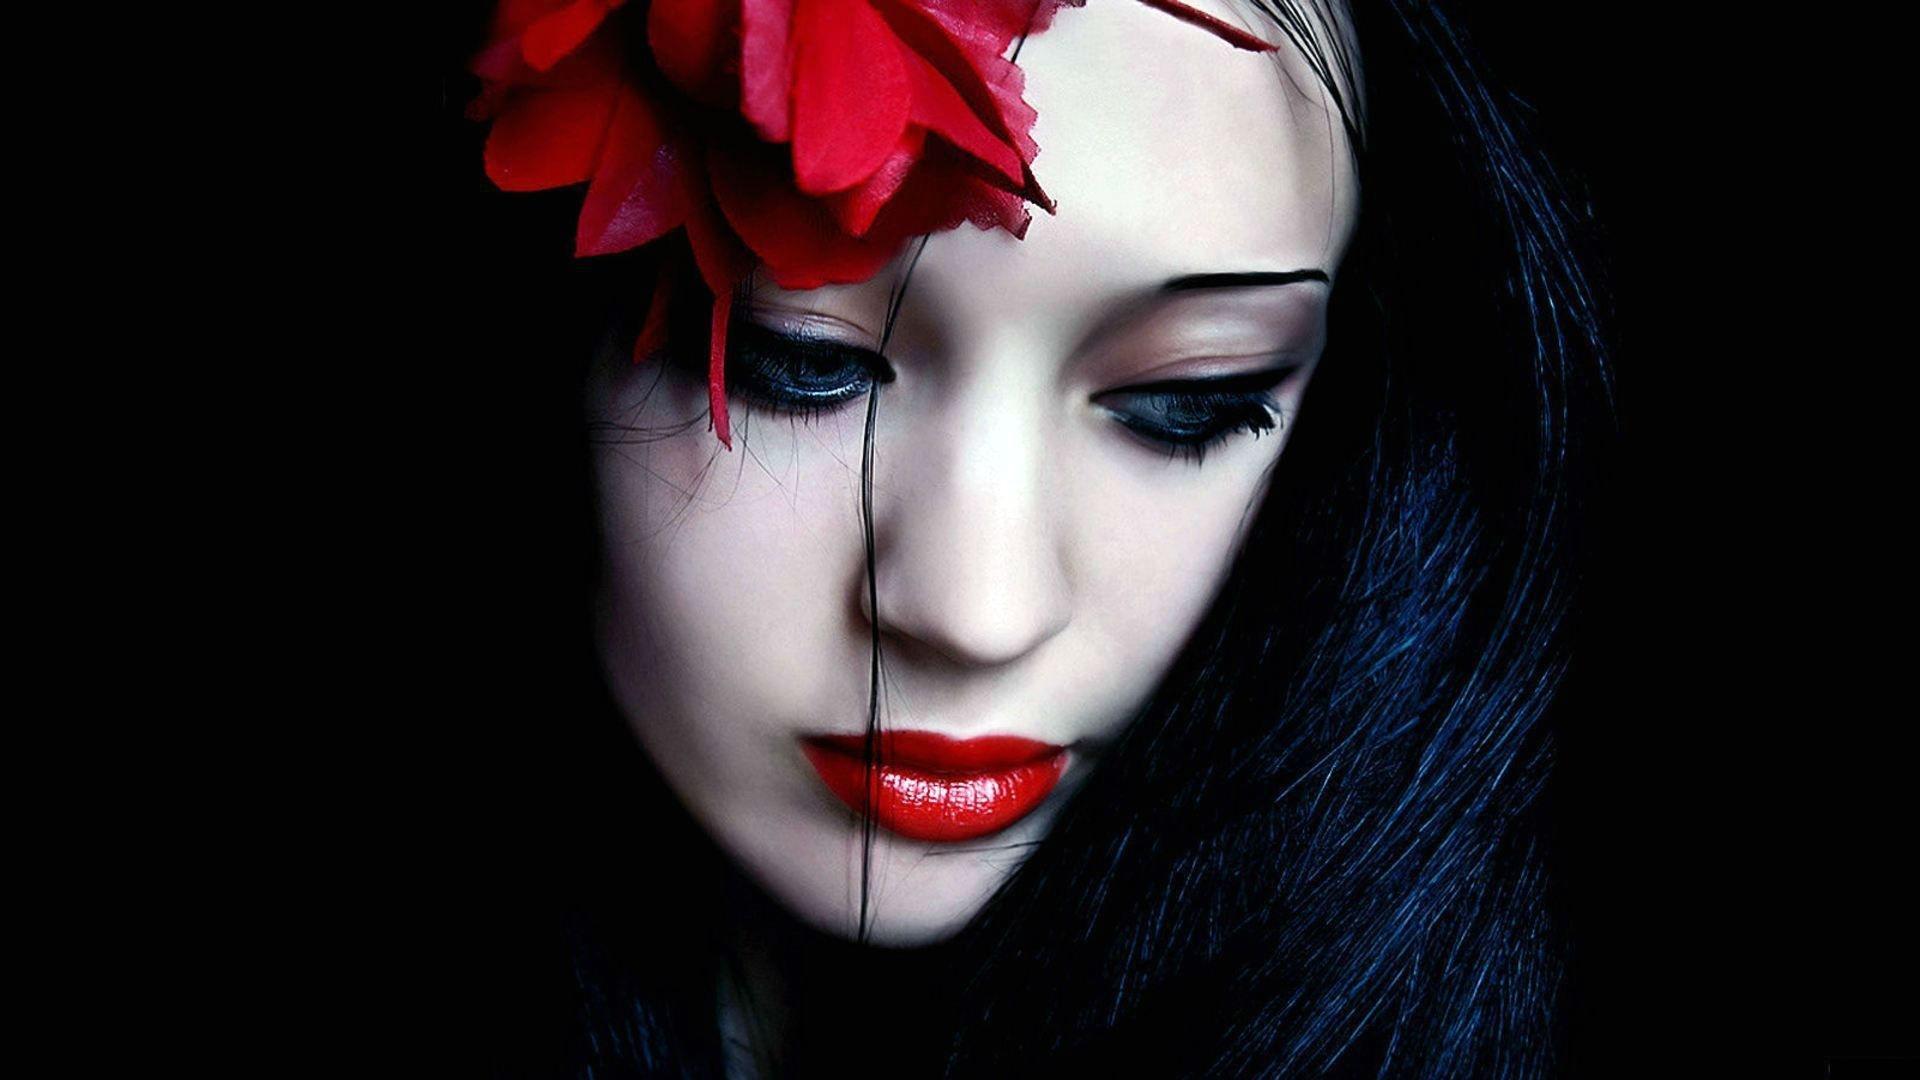 Women females girls gothic vampire face pale sad sorrow emotions red